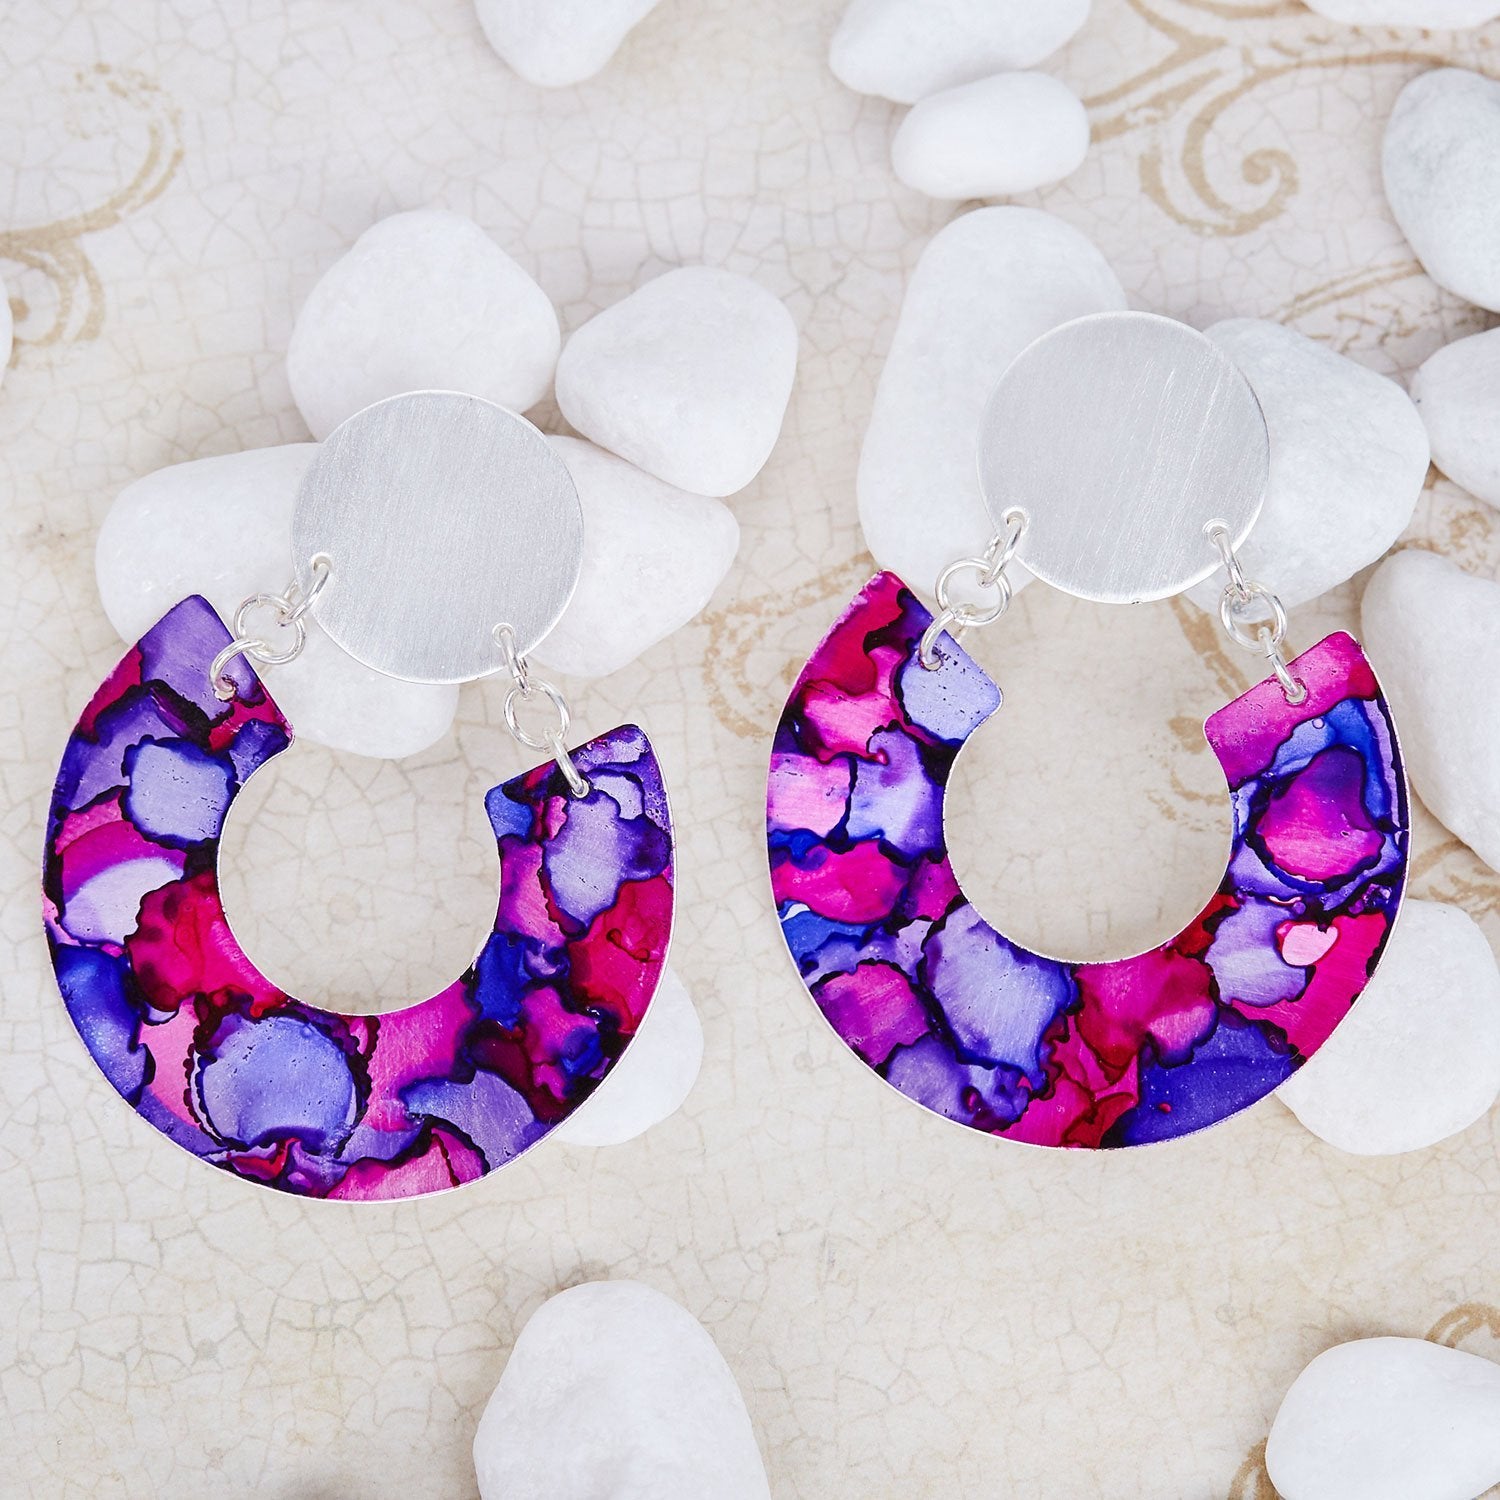 Sterling Silver Plated Horseshoe Earrings - Available in More Colors